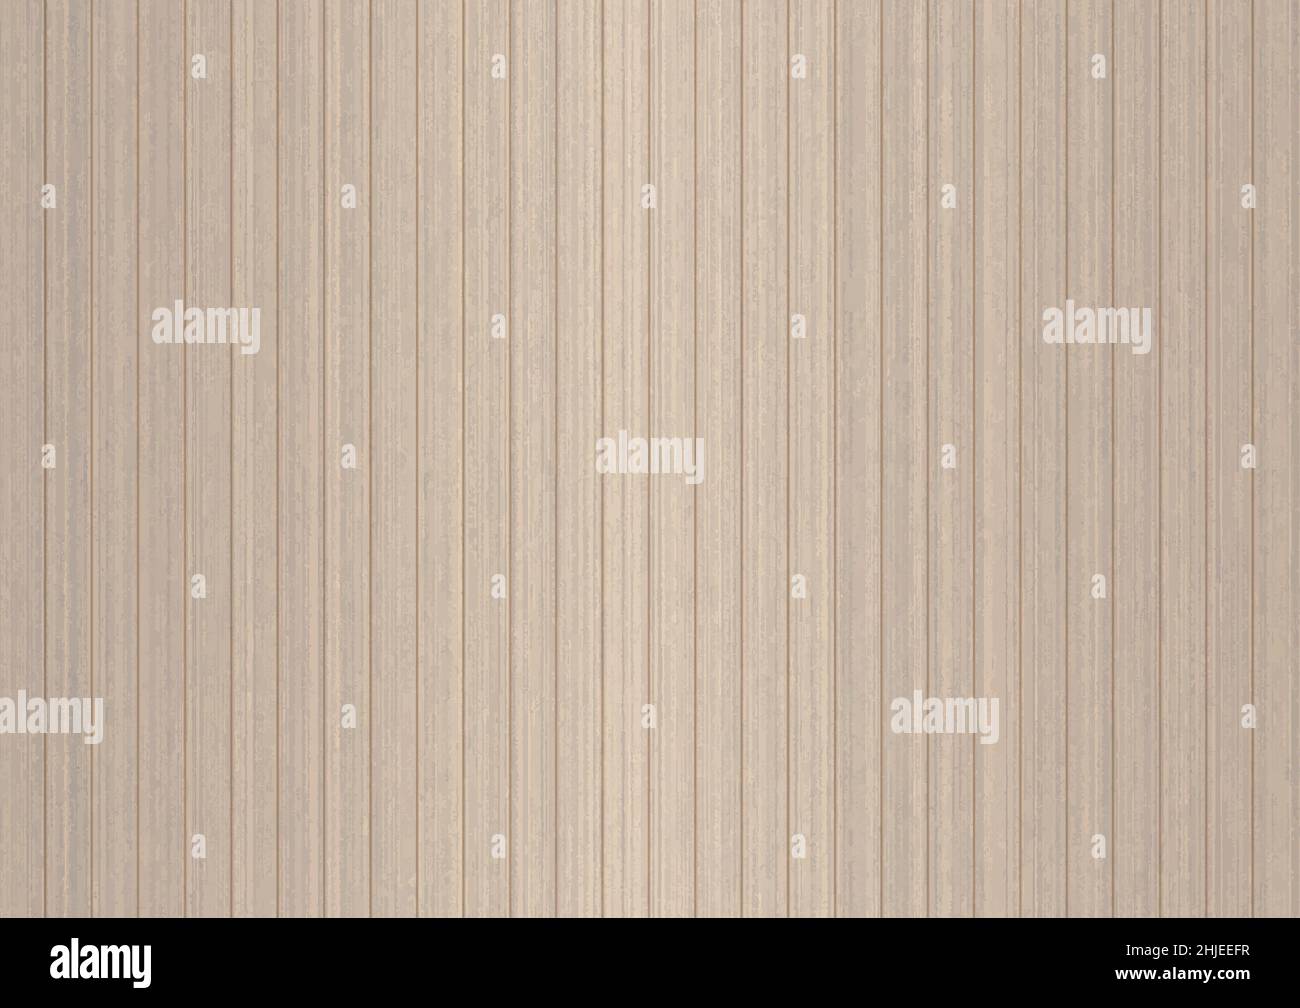 Natural wood texture vector. Abstract pattern background. Elegant material timber surface illustration. Vertical wall interior design to use. Stock Vector